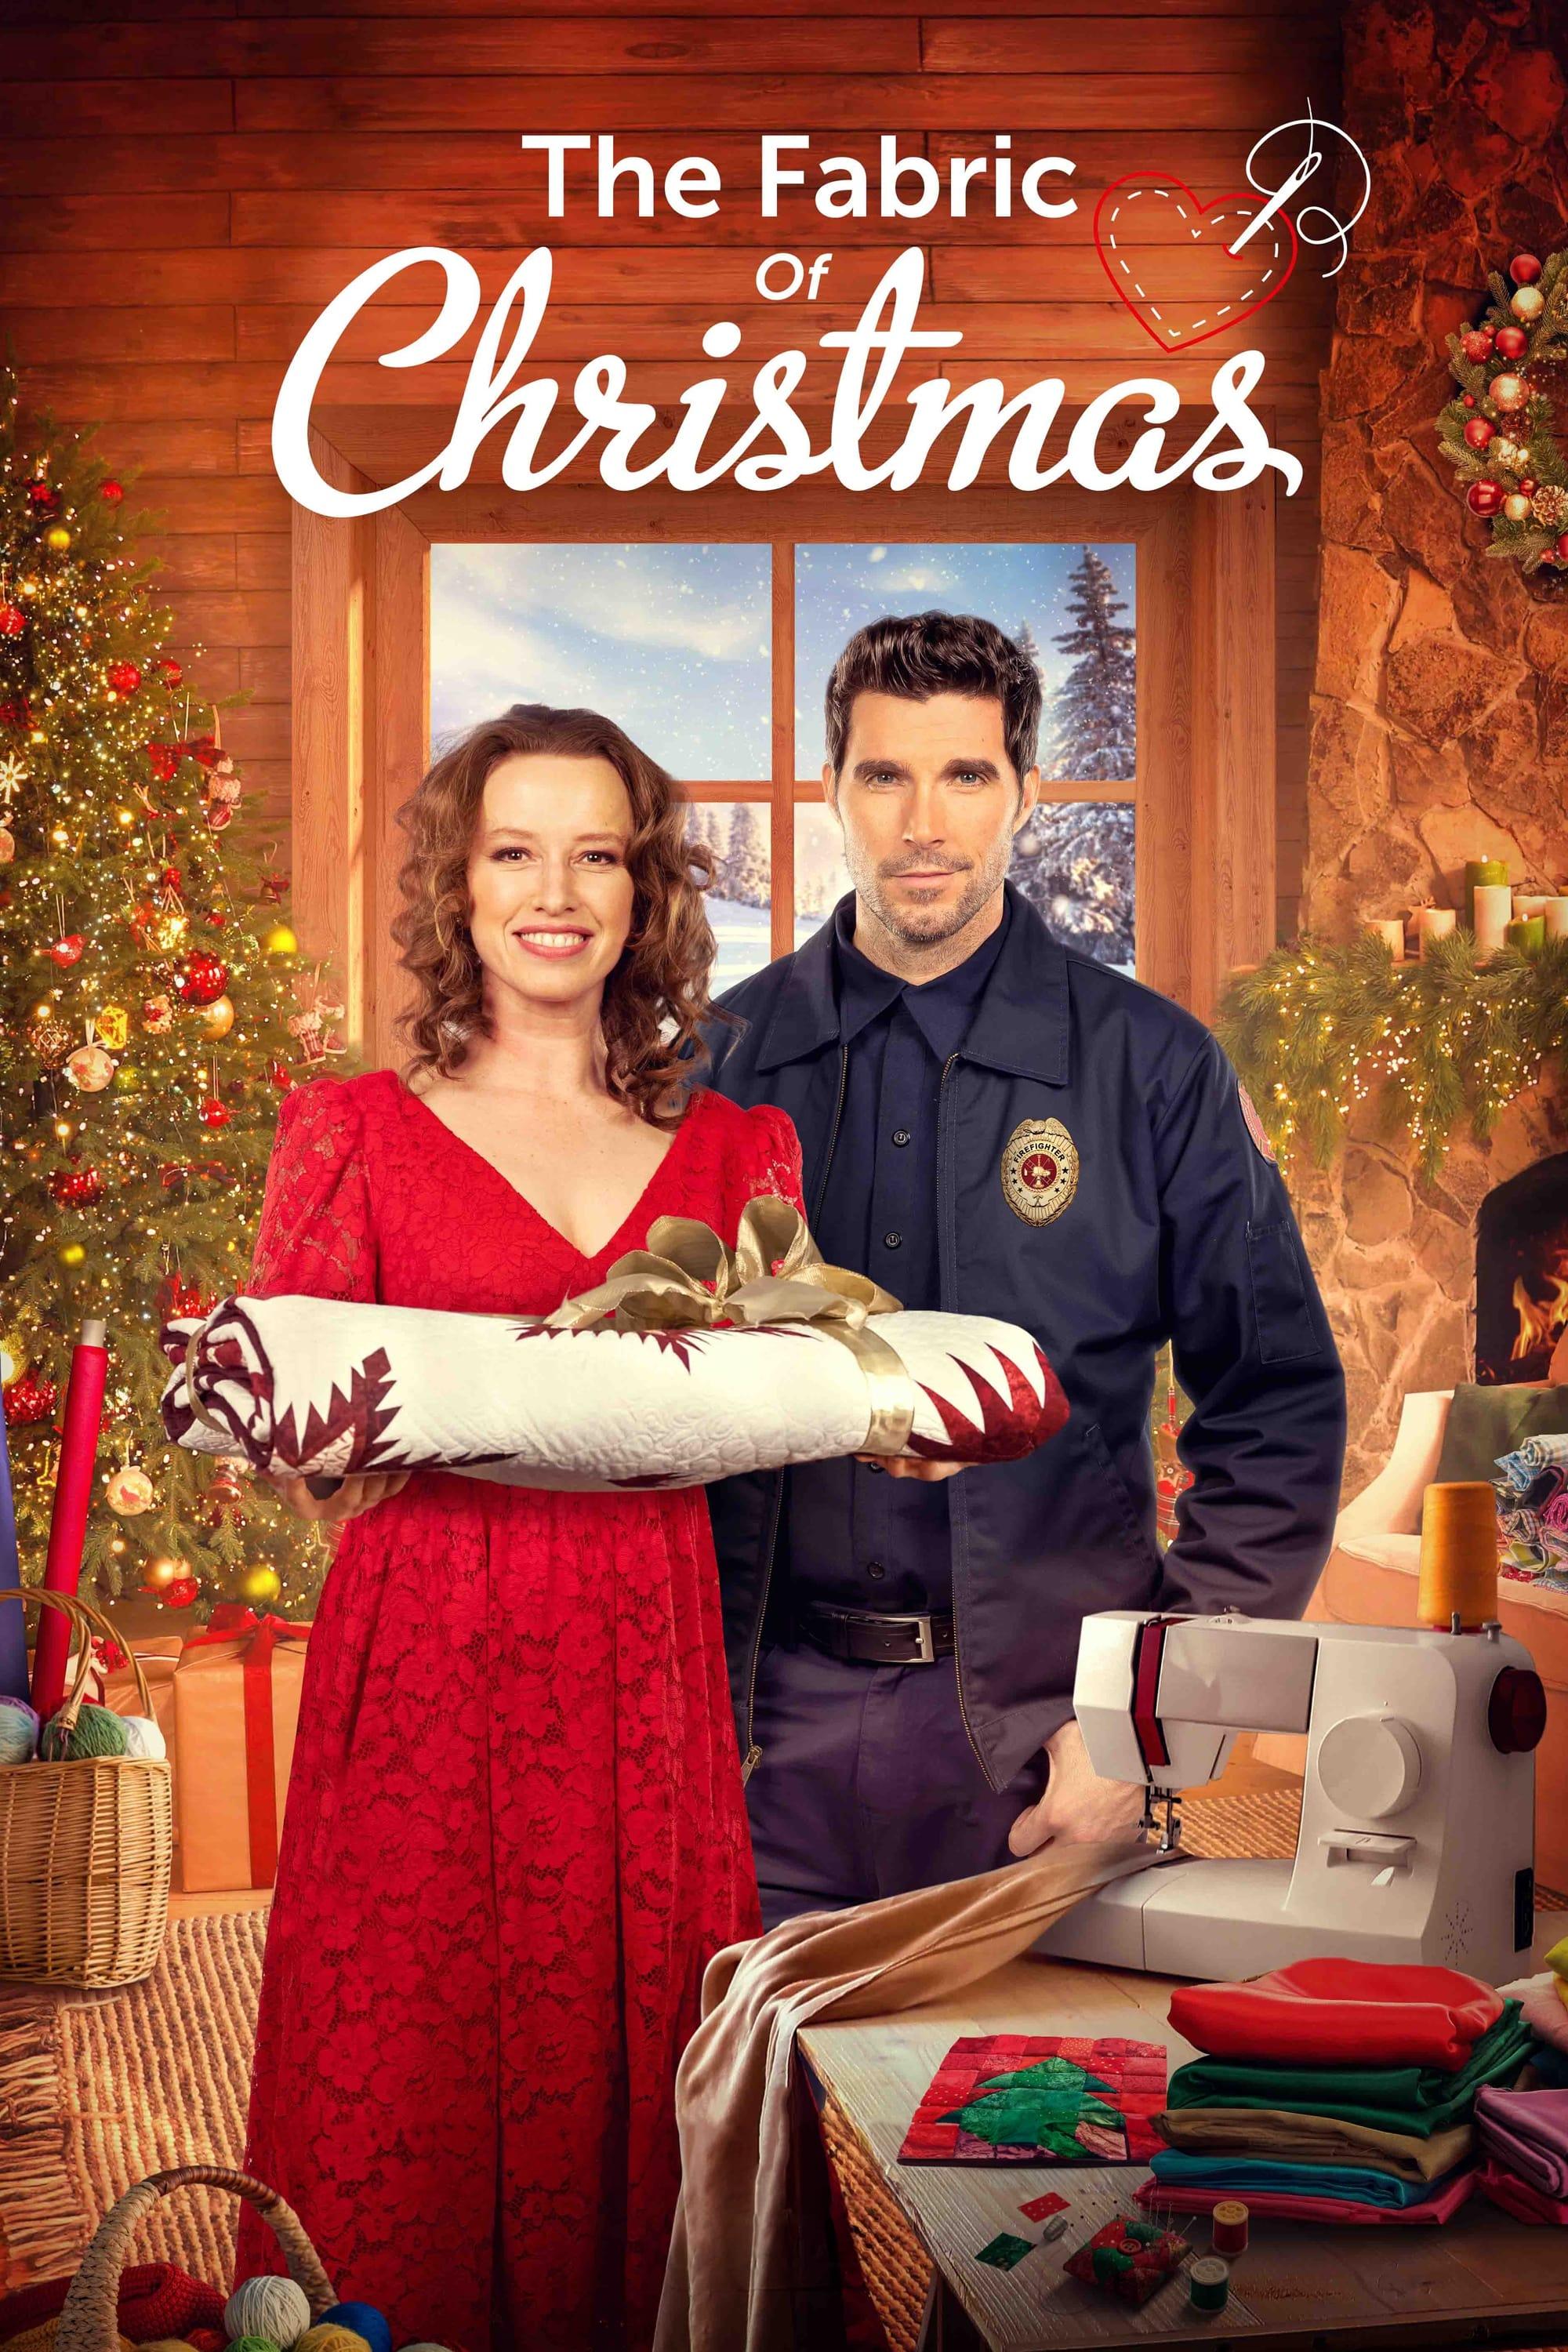 The Fabric of Christmas poster